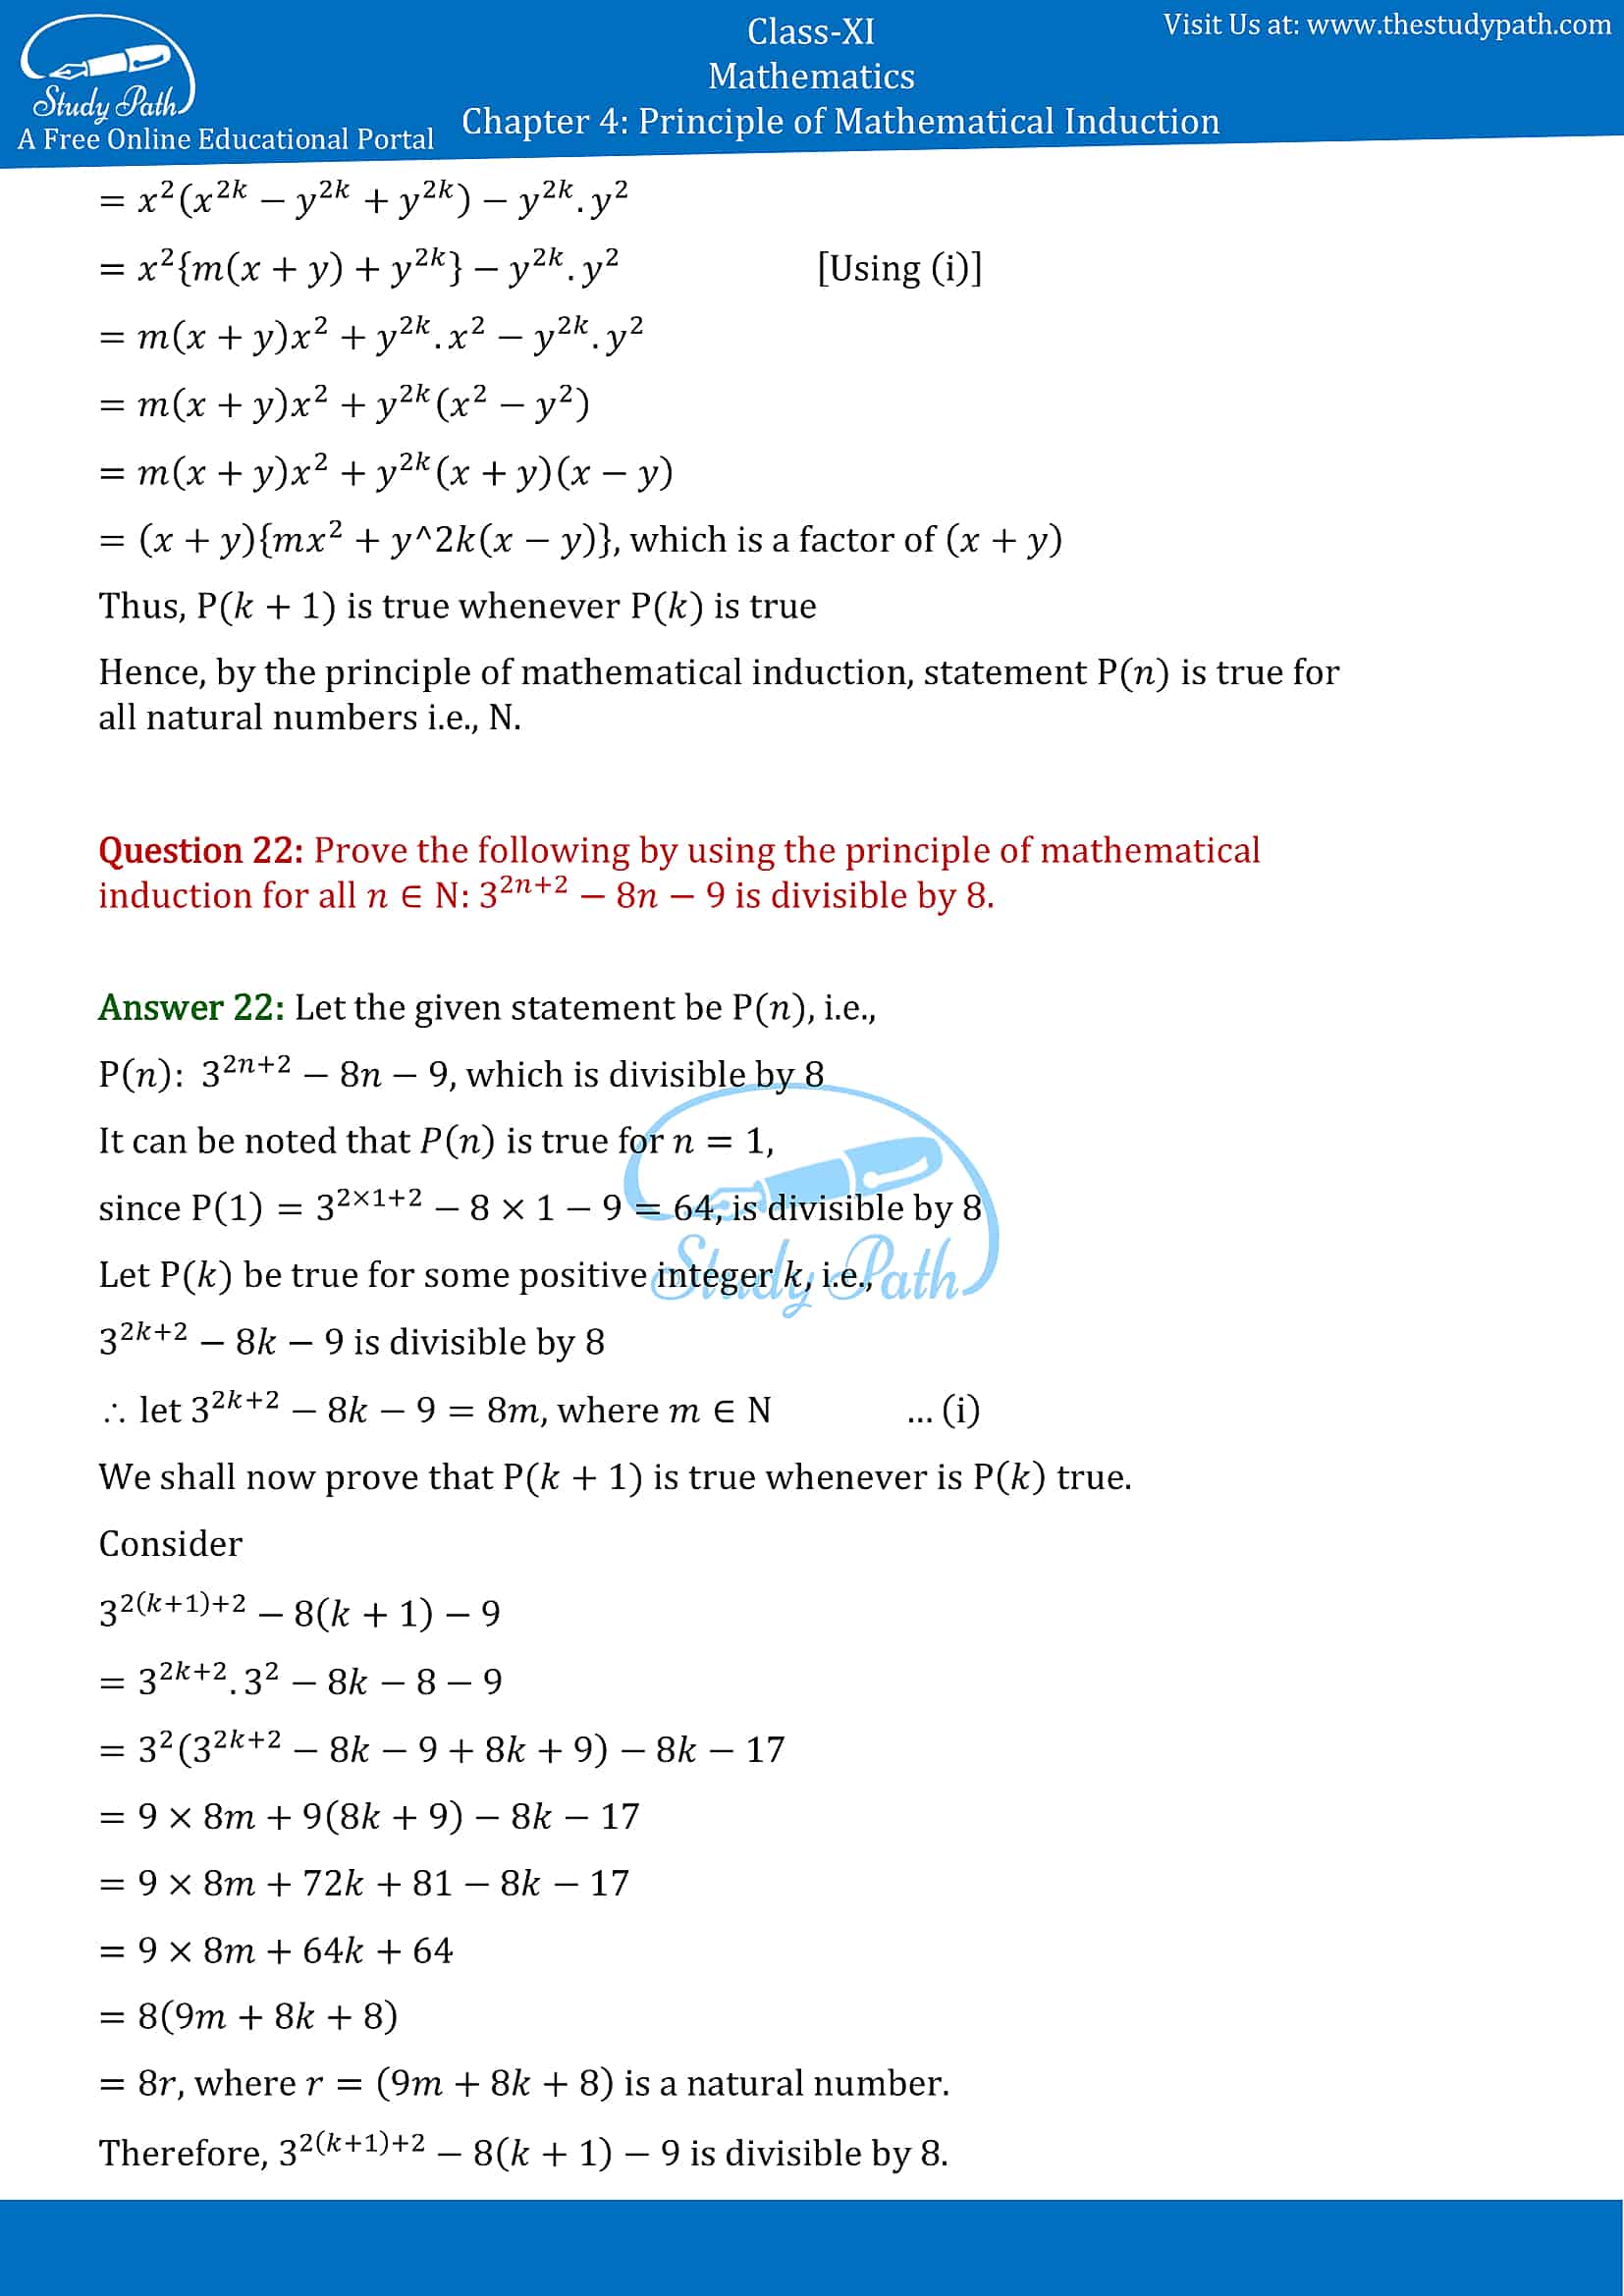 NCERT Solutions for Class 11 Maths chapter 4 Principle of Mathematical Induction